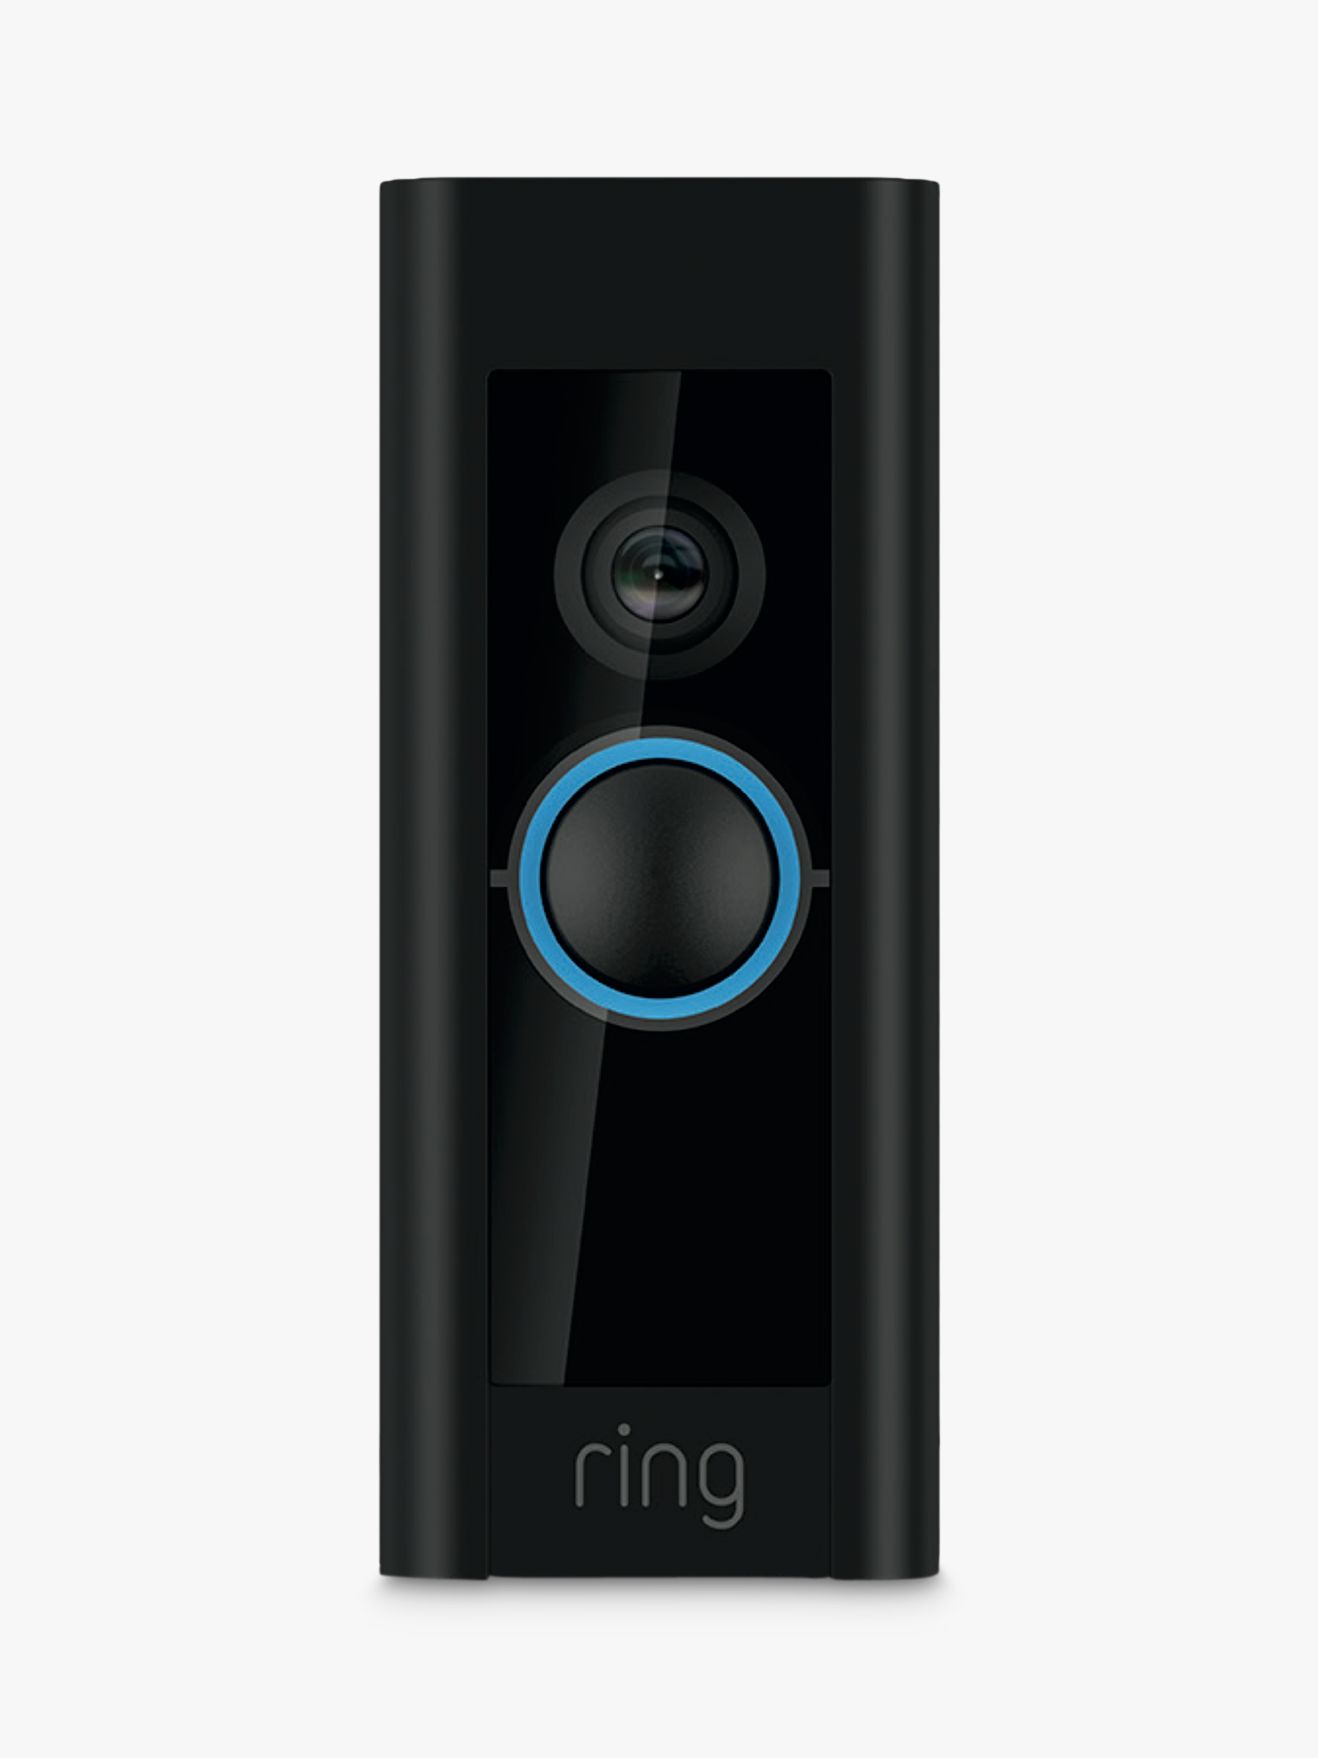 ring doorbell hardwired chime